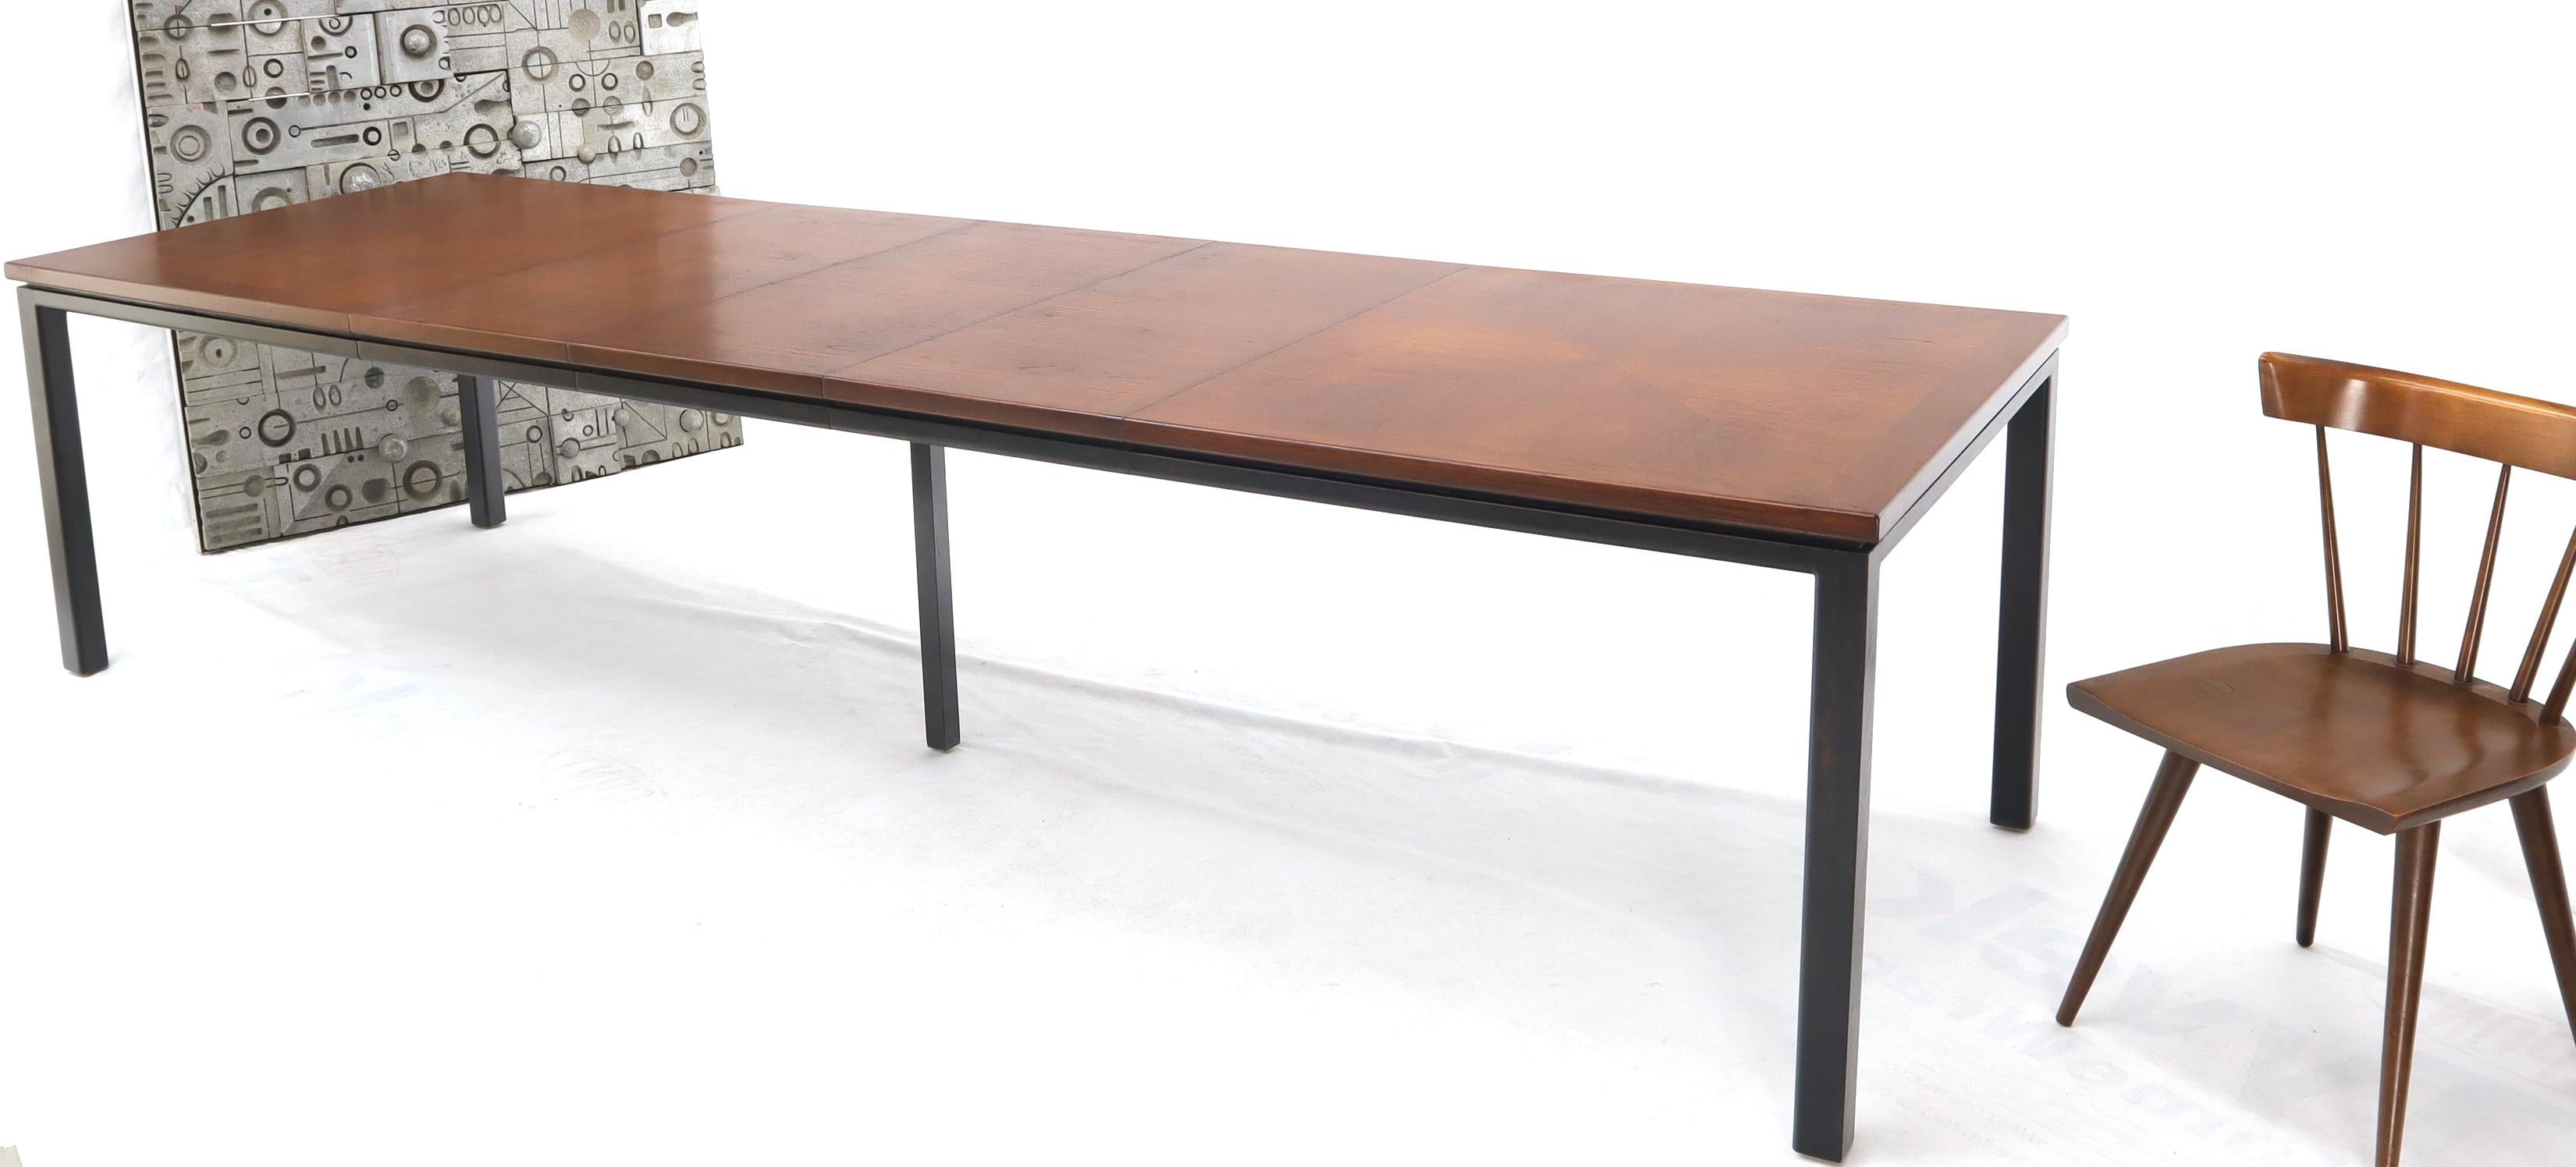 Lacquered Large Rectangle Expandable Dining Table 3 Extension Boards Atr. Harvey Probber